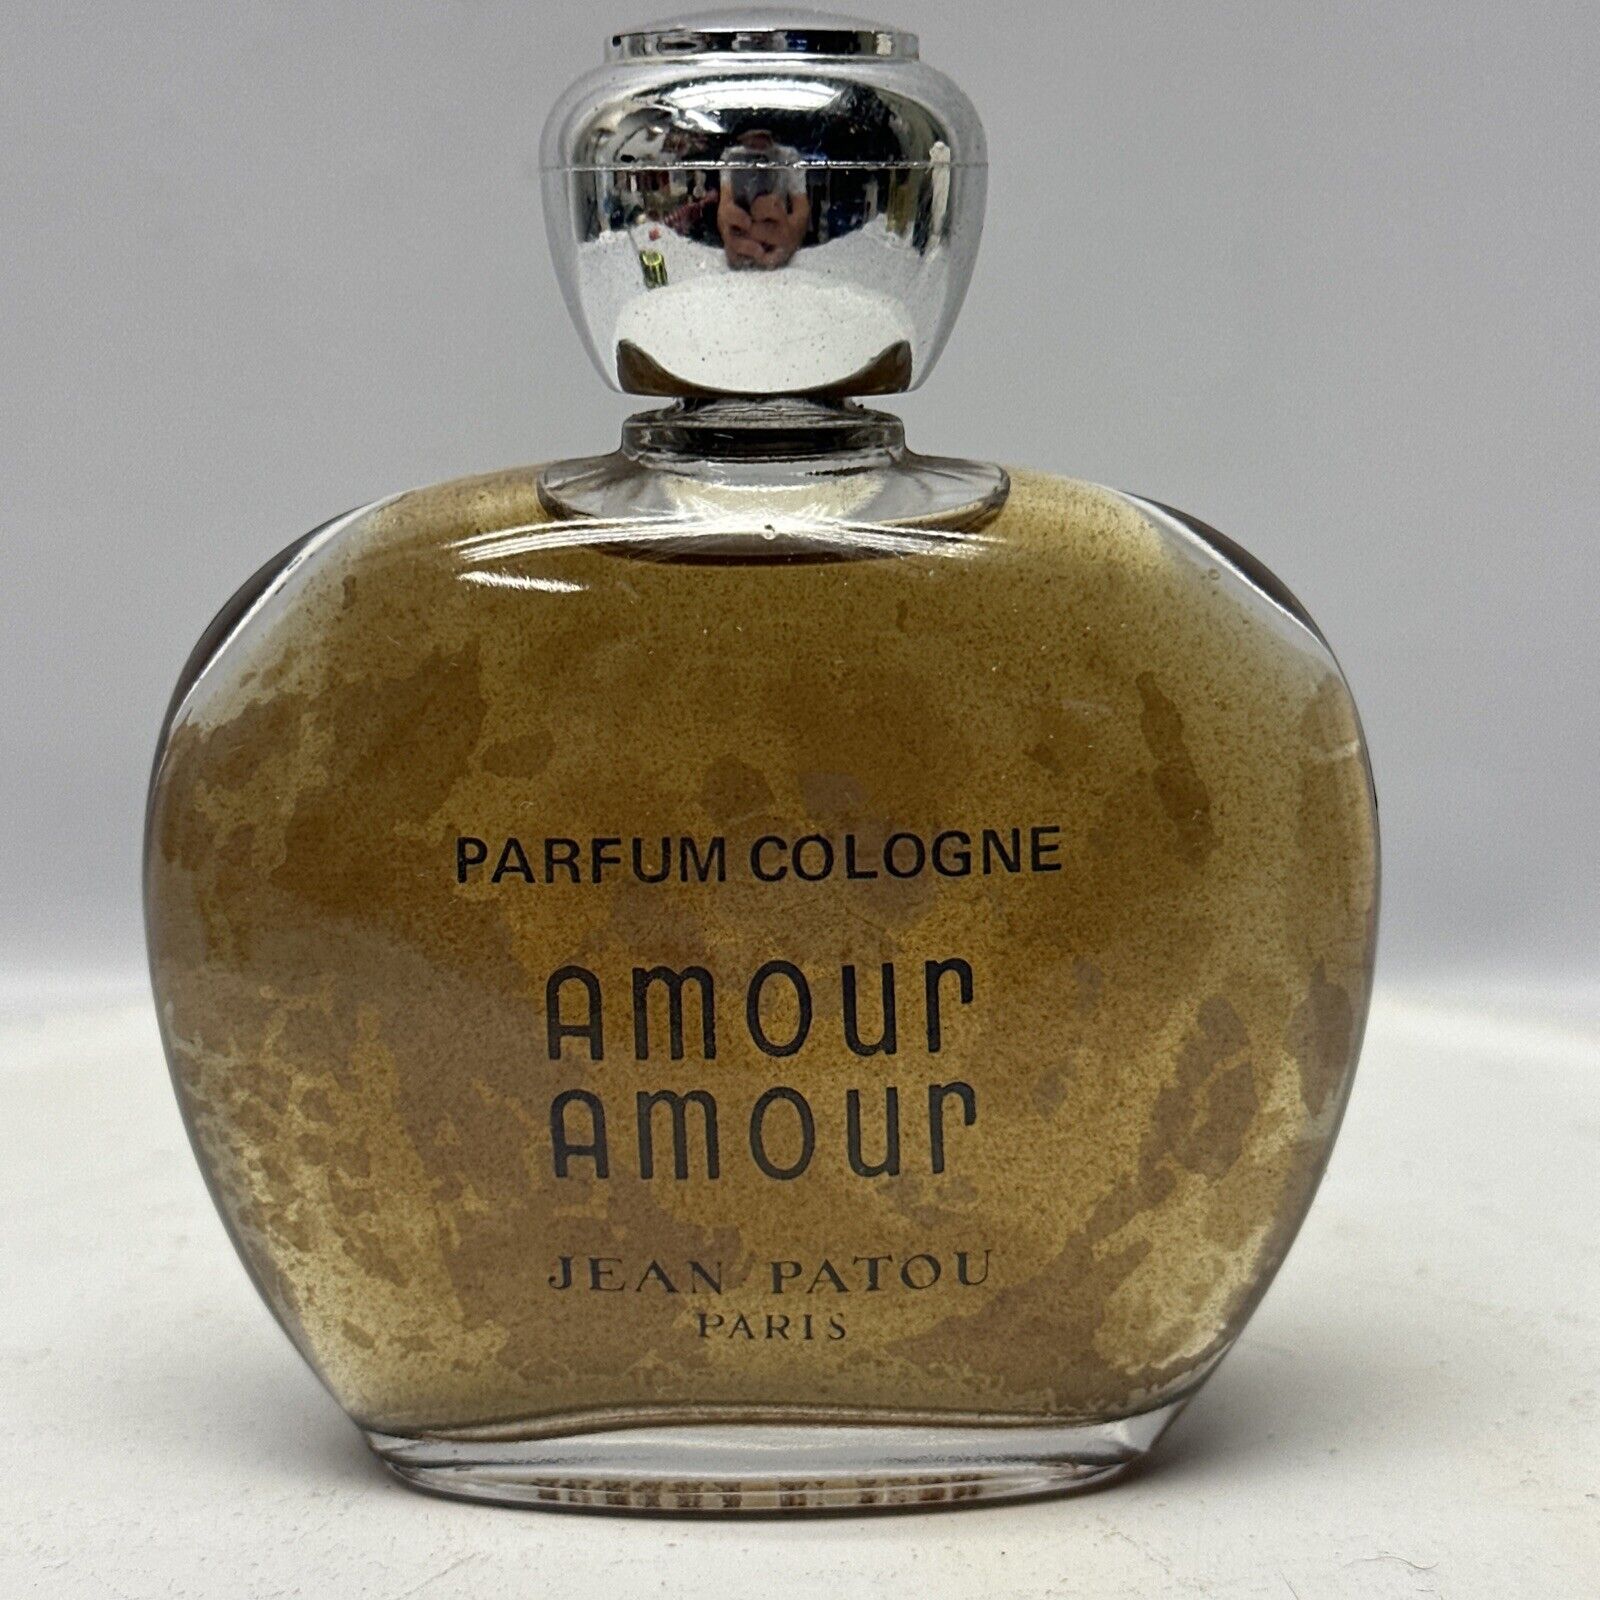 Jean Patou Amour Amour factice. Vintage dummy bottle for display